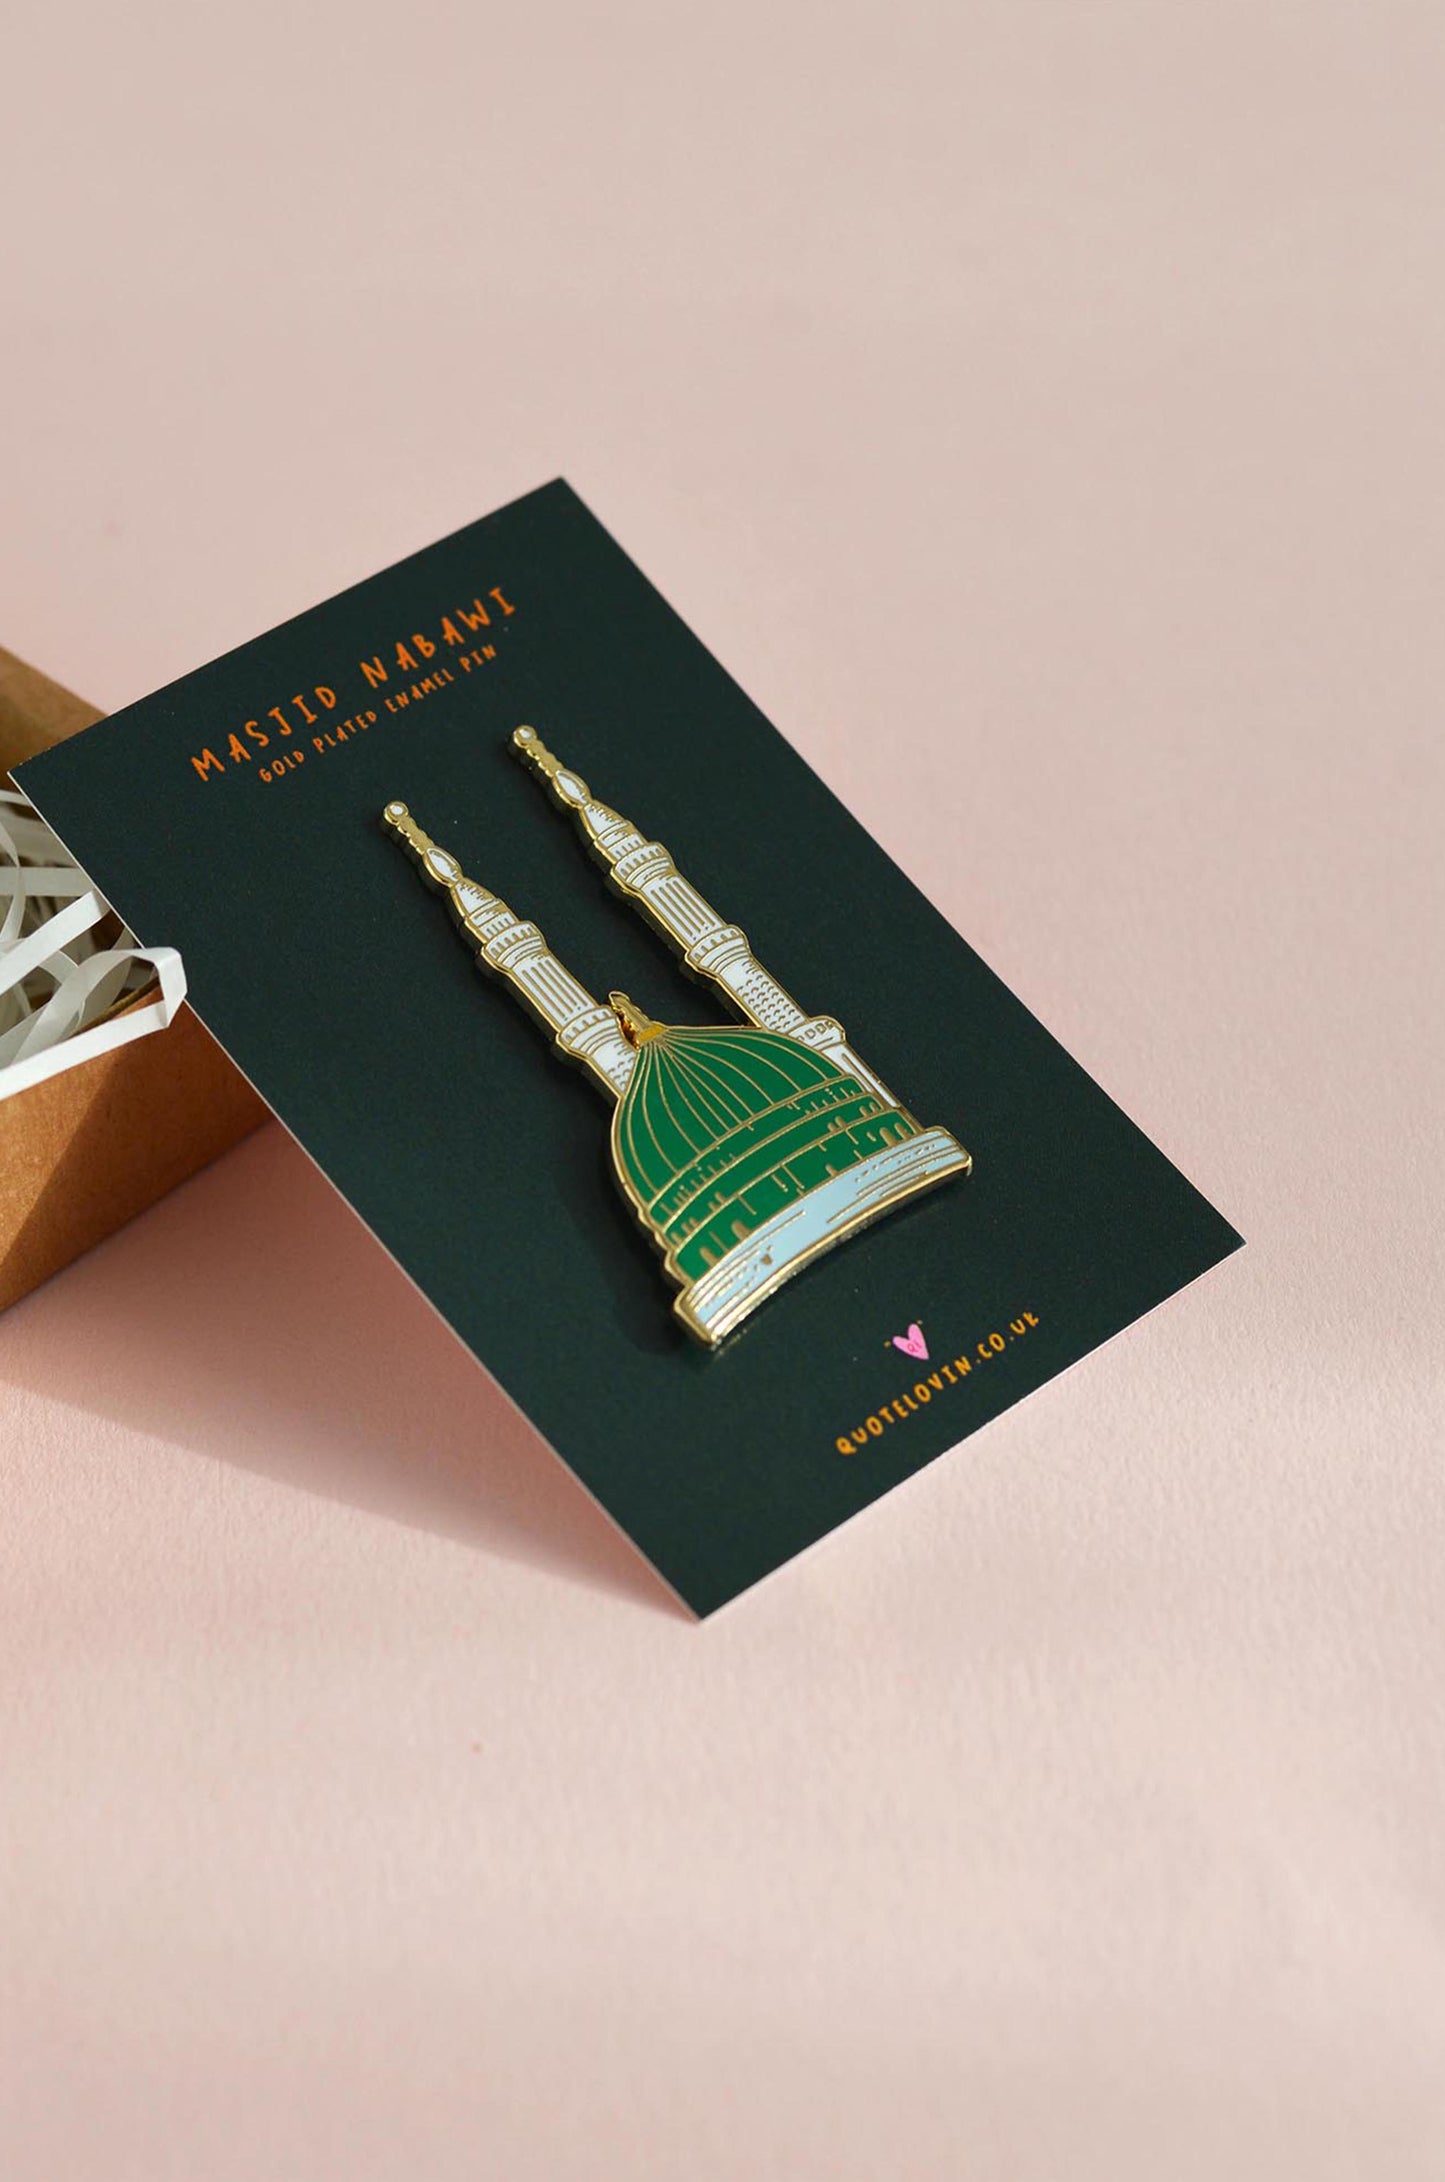 Masjid Nabawi enamel pin | Quote Lovin' | Eid gifts - Quote Lovin'